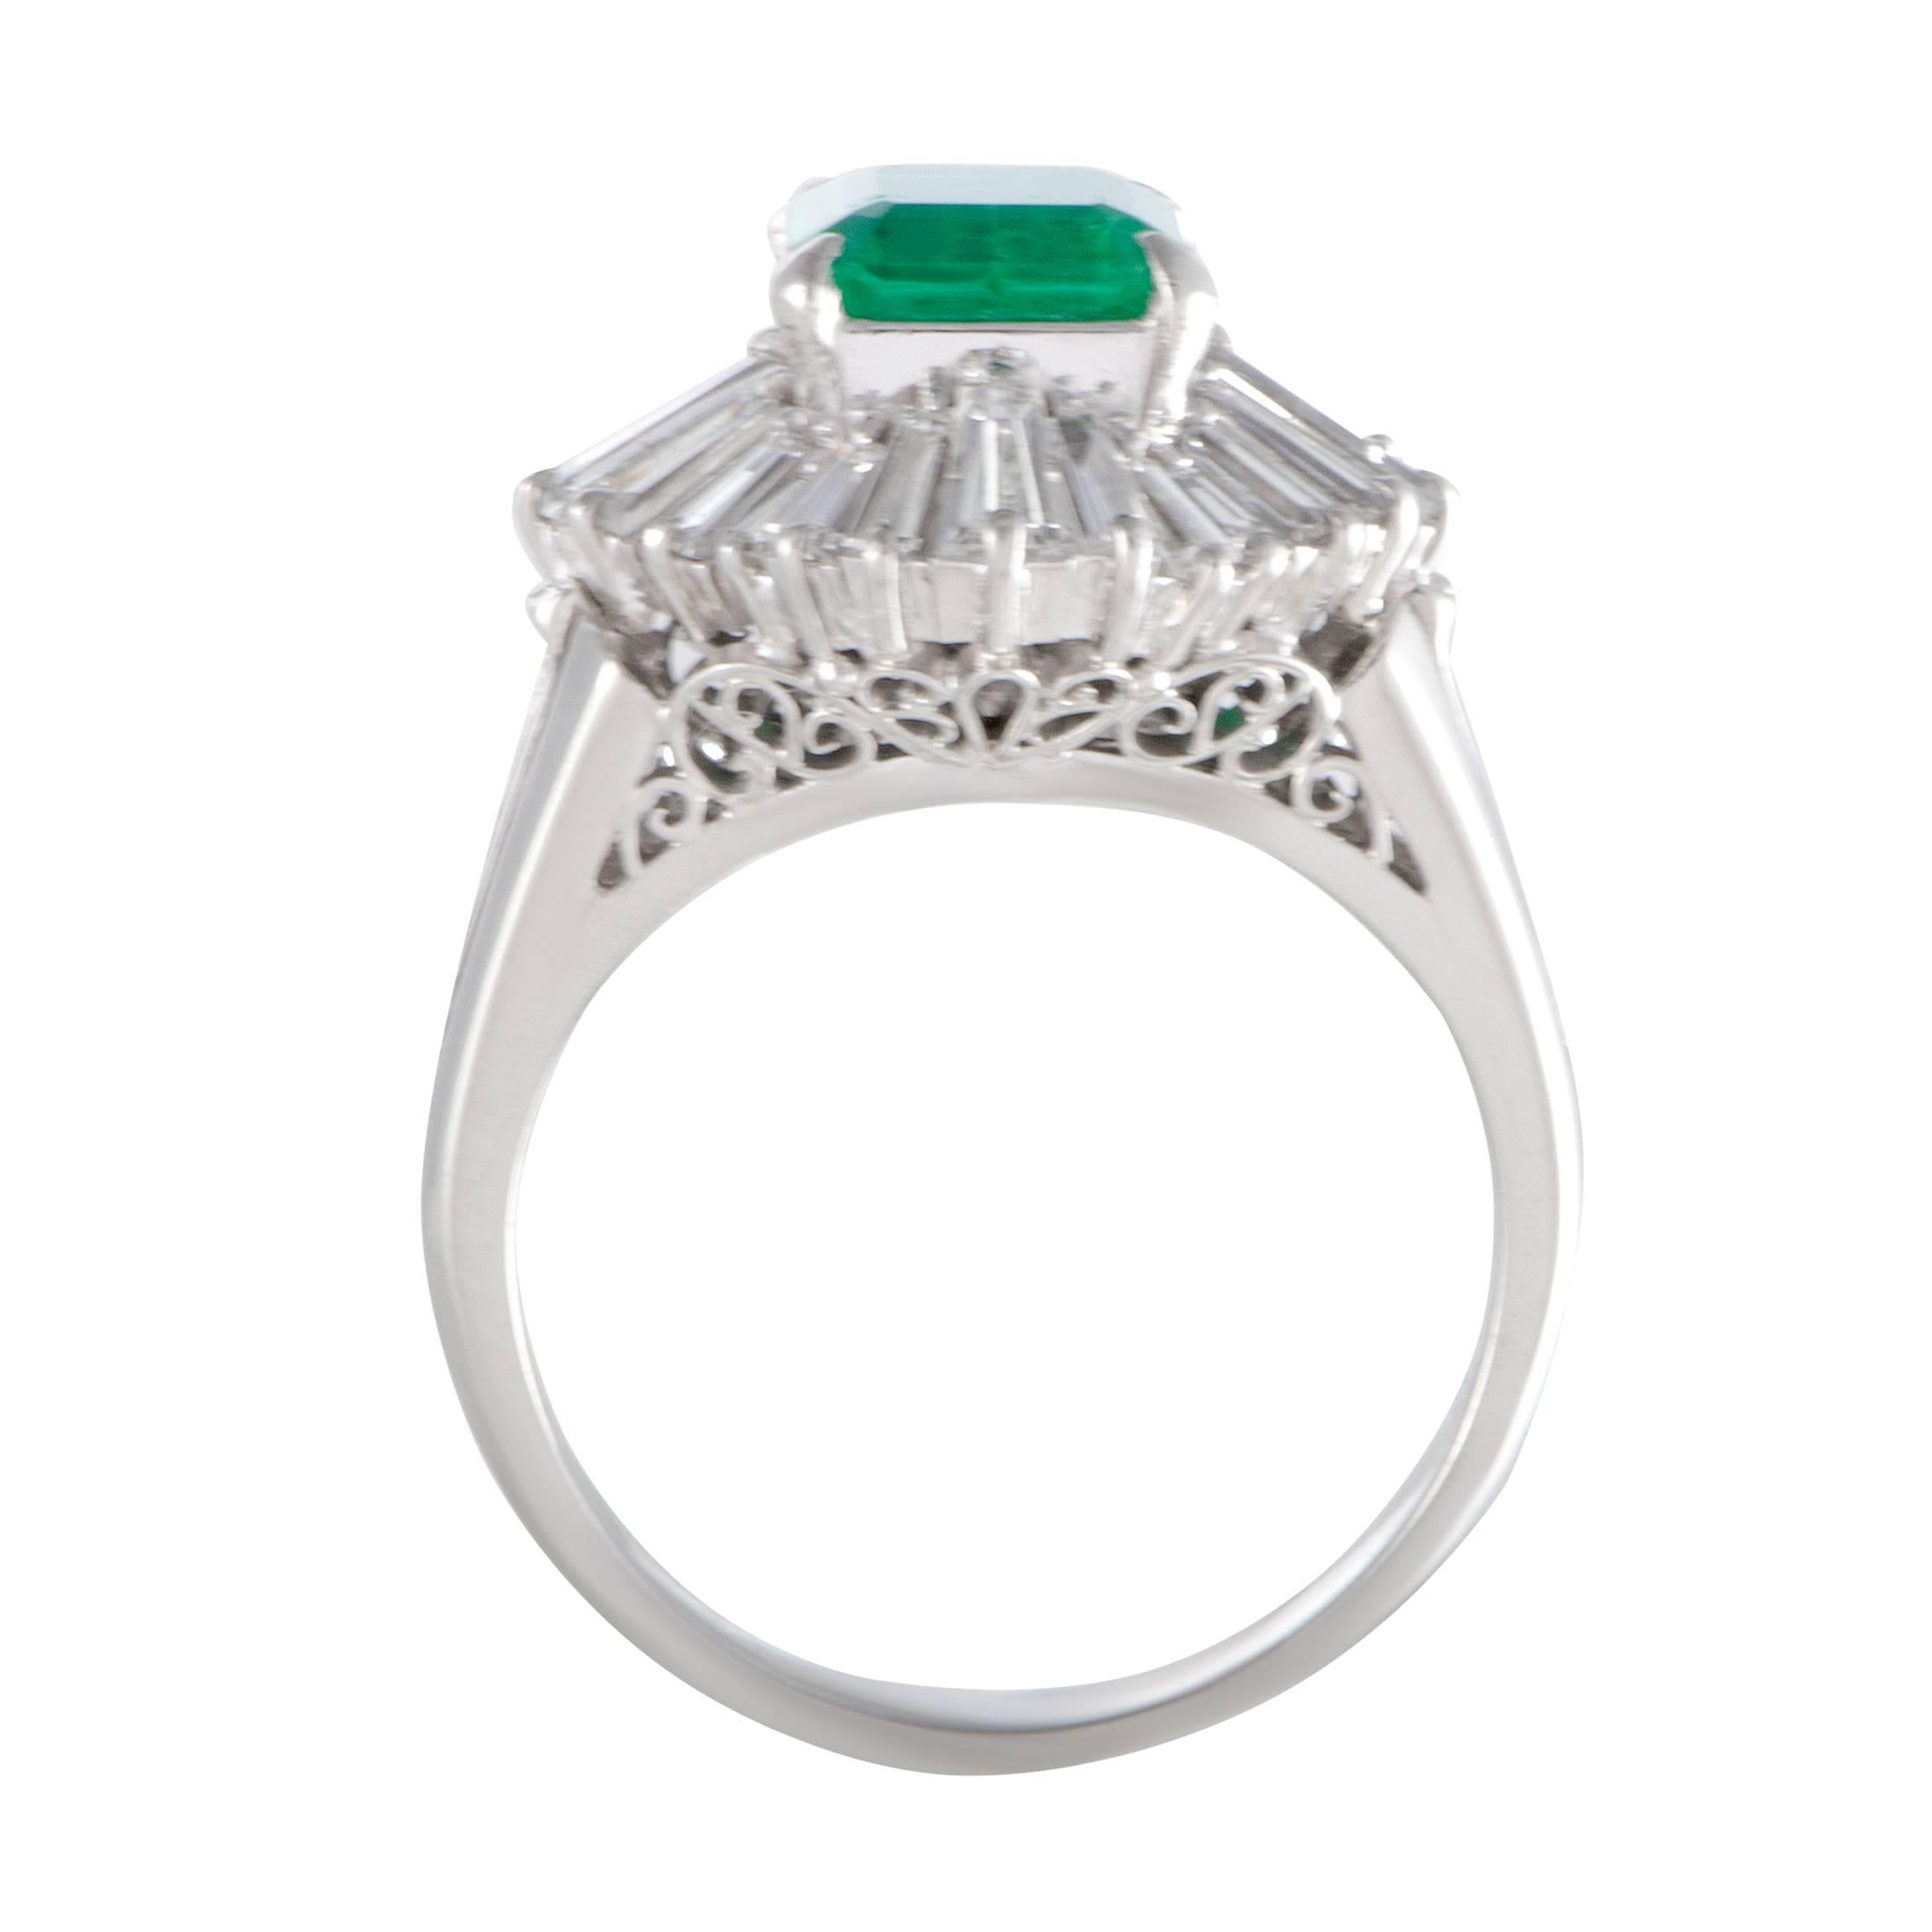 This glamorous platinum ring exhibits a sensationally alluring style and an extravagantly feminine appeal. The gorgeous ring features 1.25ct of dazzling diamonds that surround a magnificent emerald, weighing 1.05ct, that accentuate the luxurious